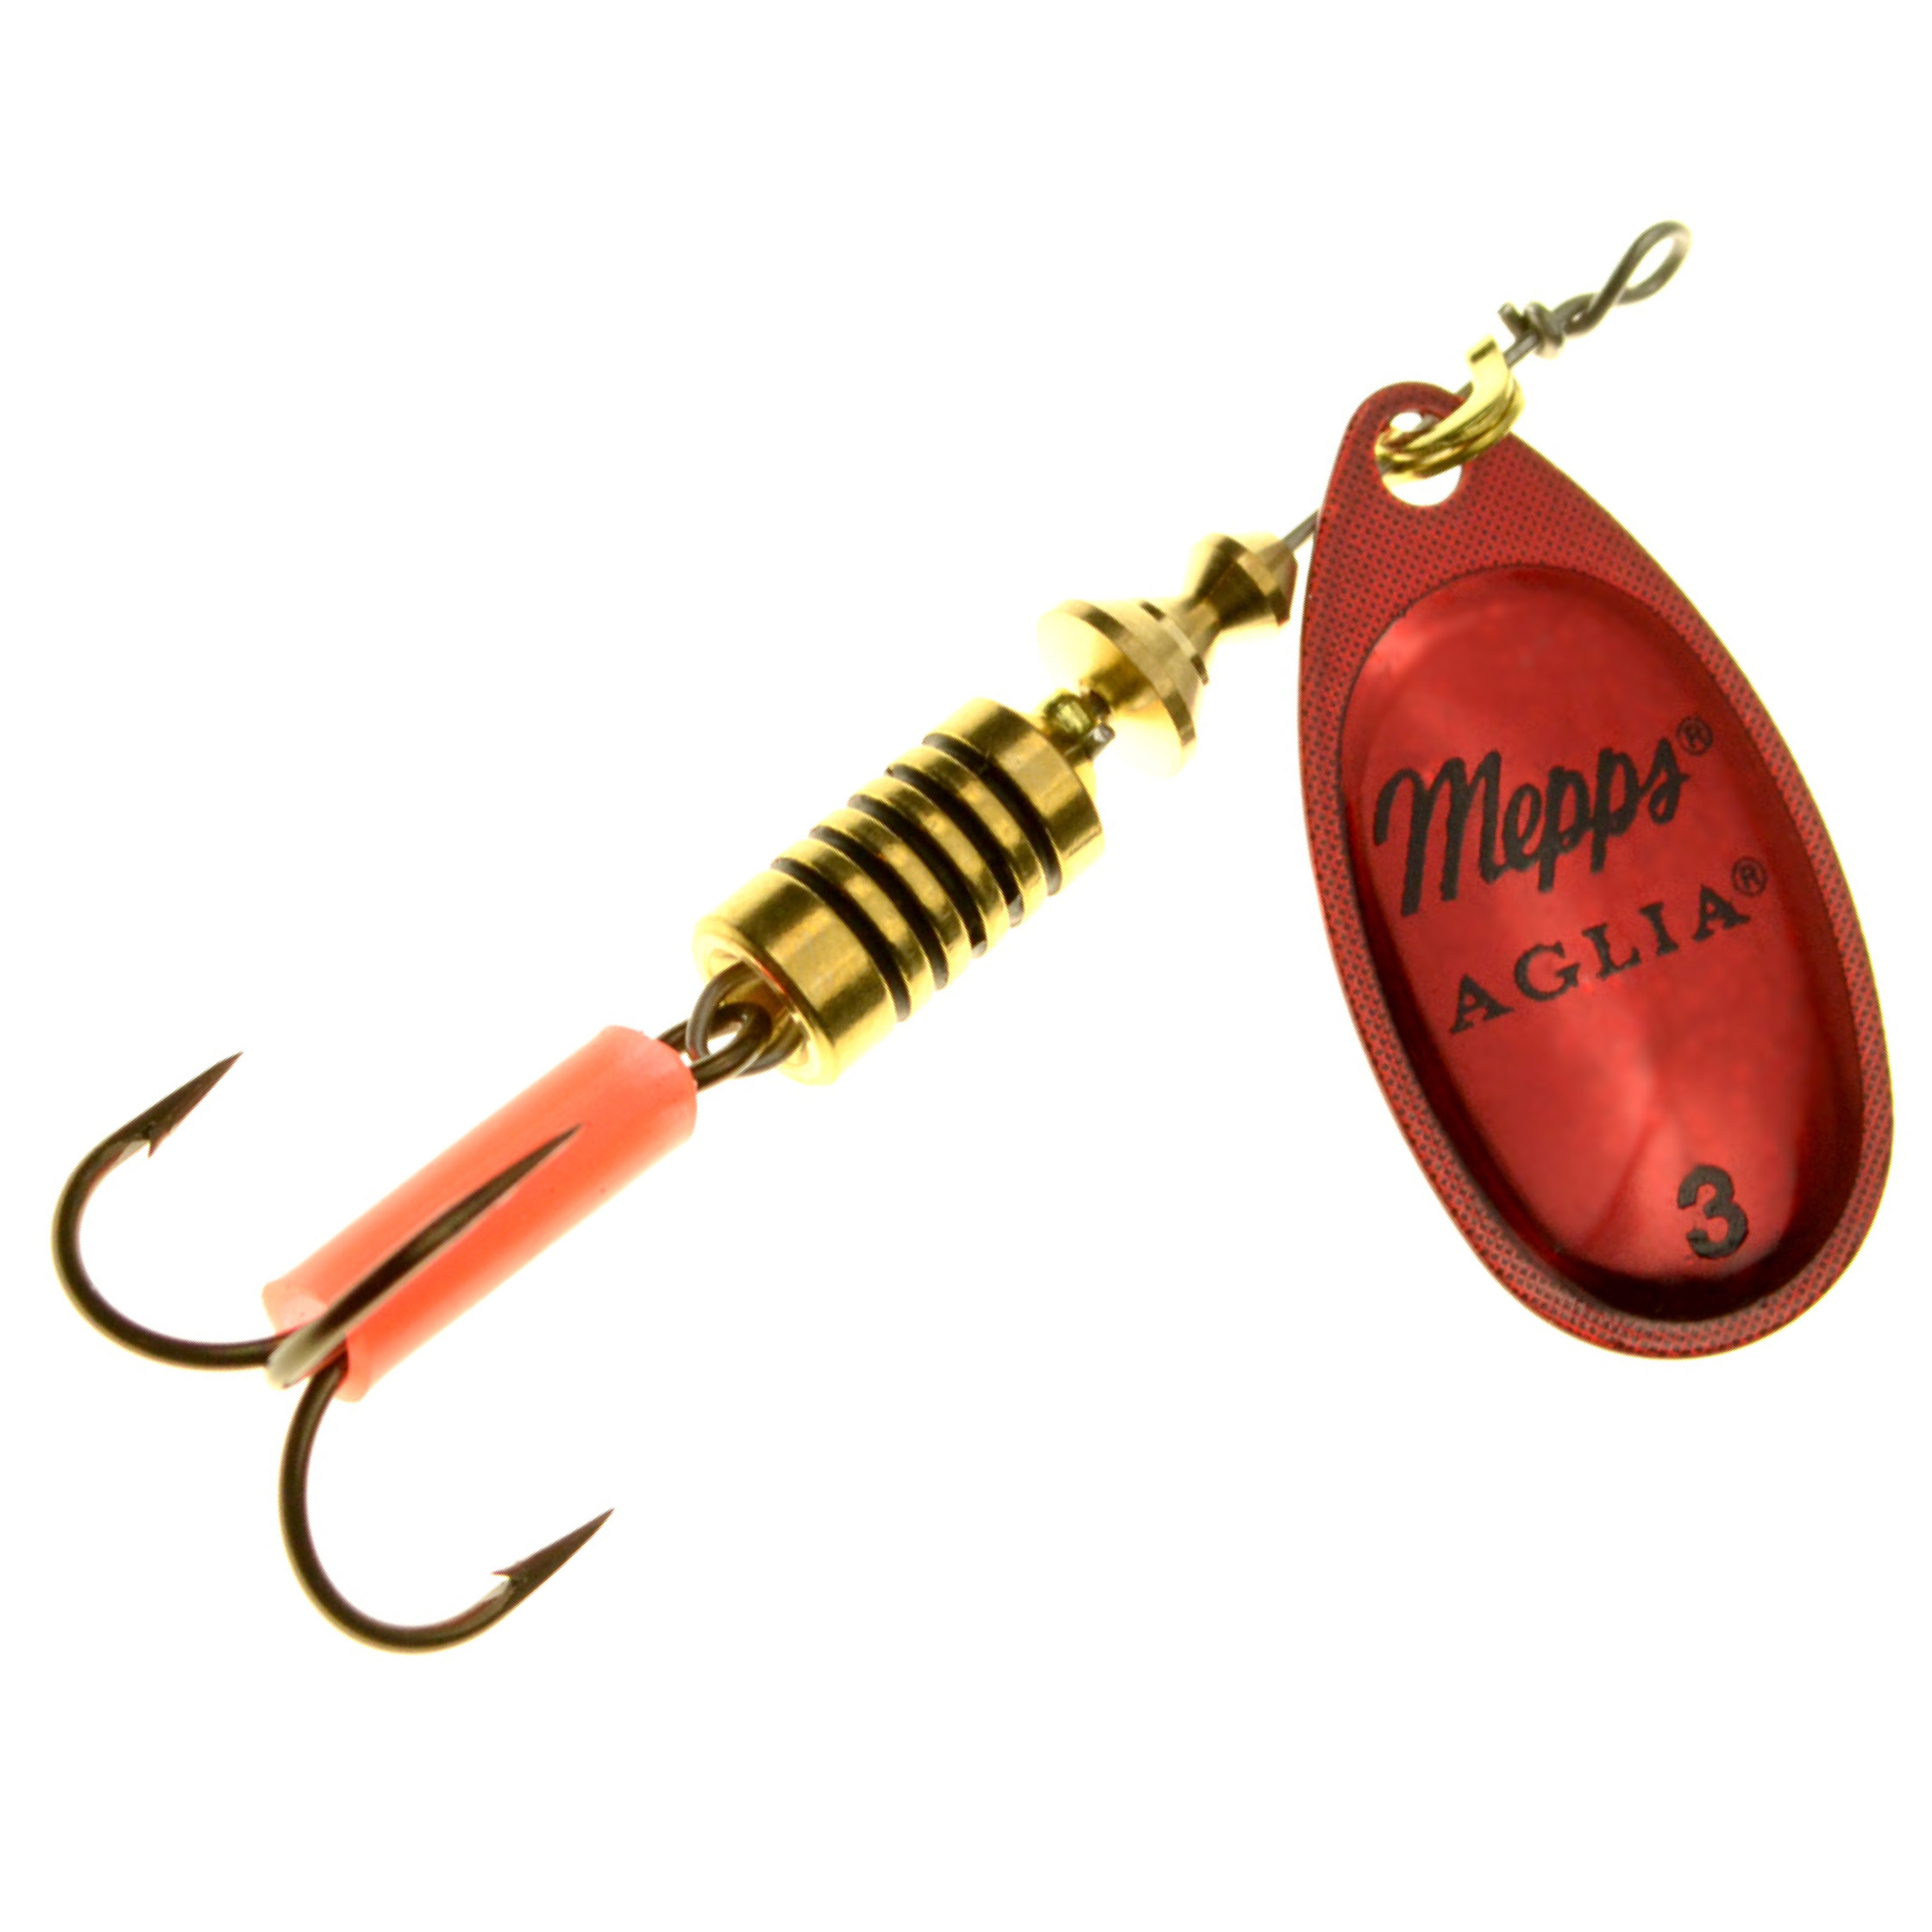 Mepps Aglia Spinner fluo white, Metalbaits, Lures and Baits, Spin  Fishing